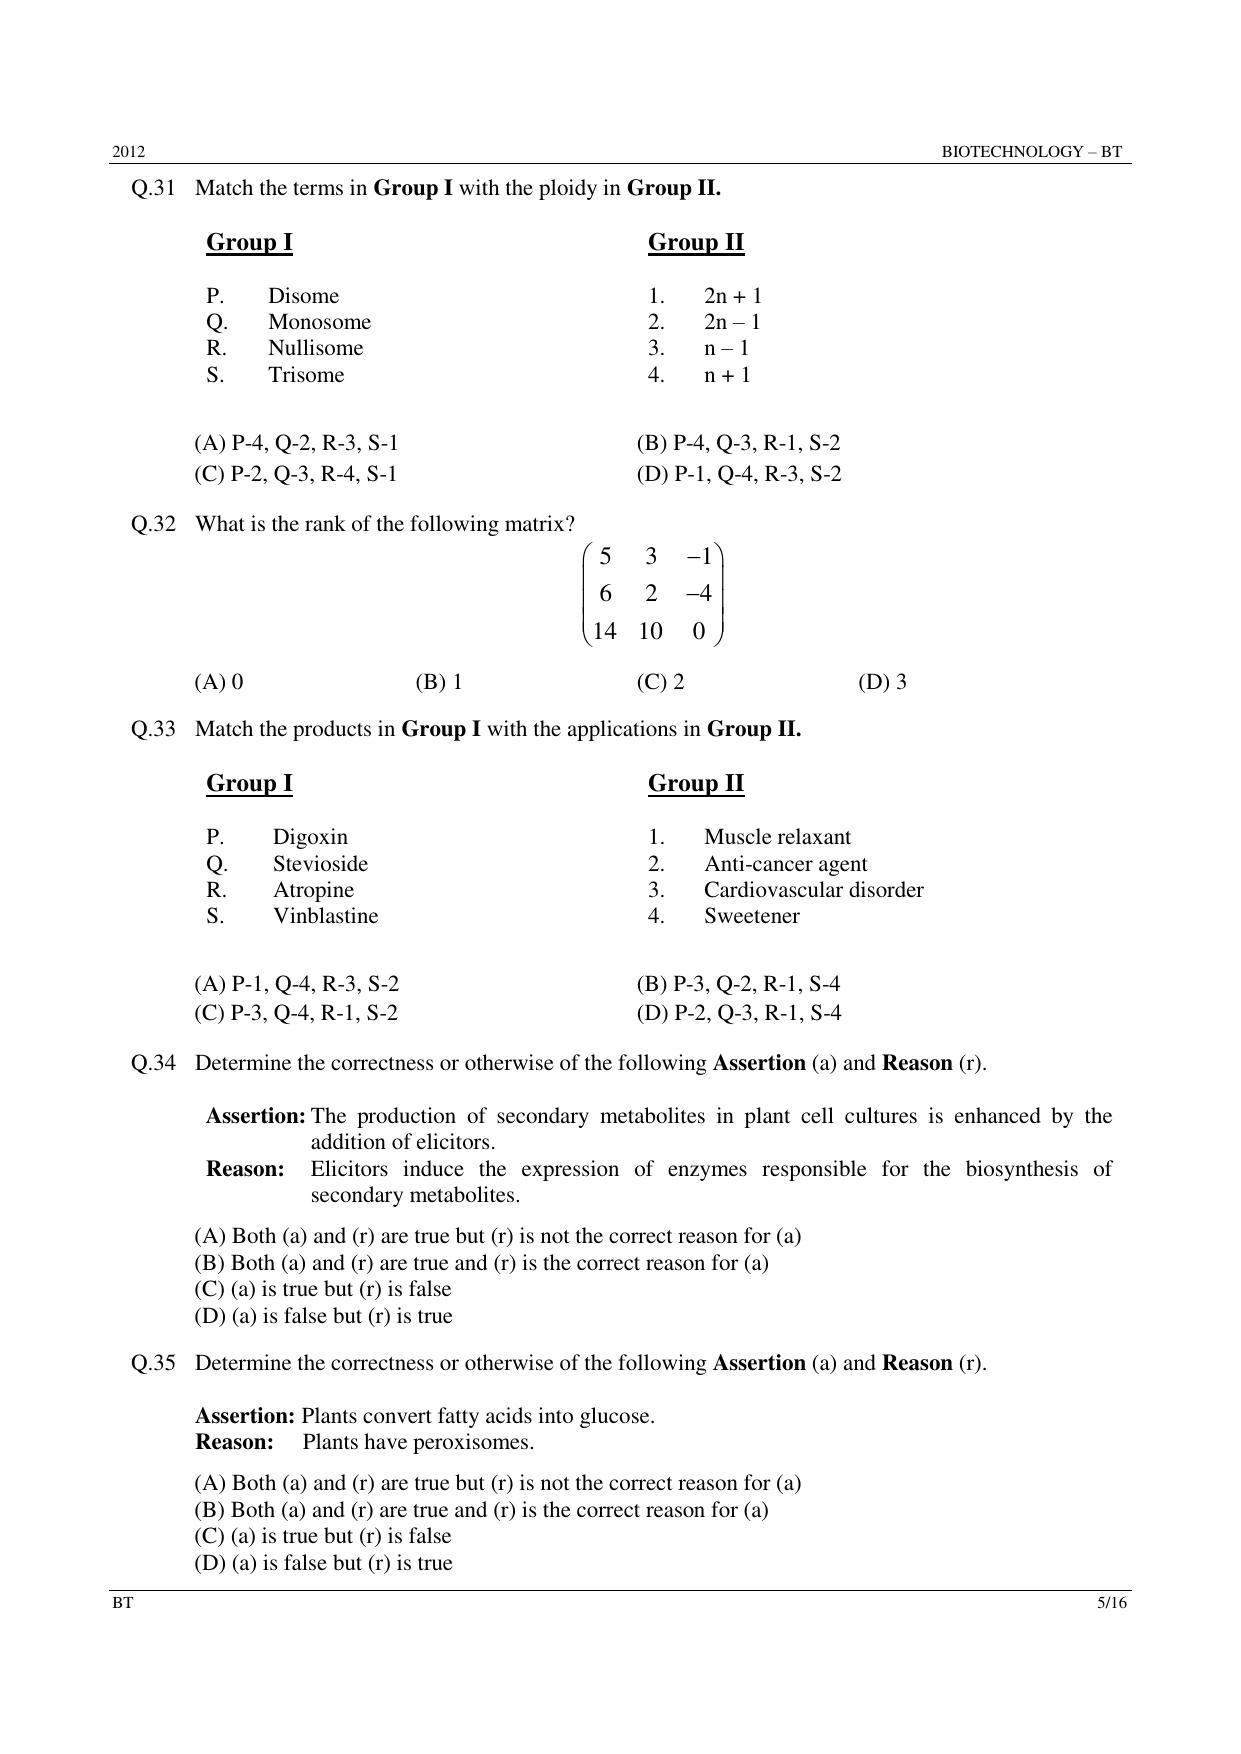 GATE 2012 Biotechnology (BT) Question Paper with Answer Key - Page 5